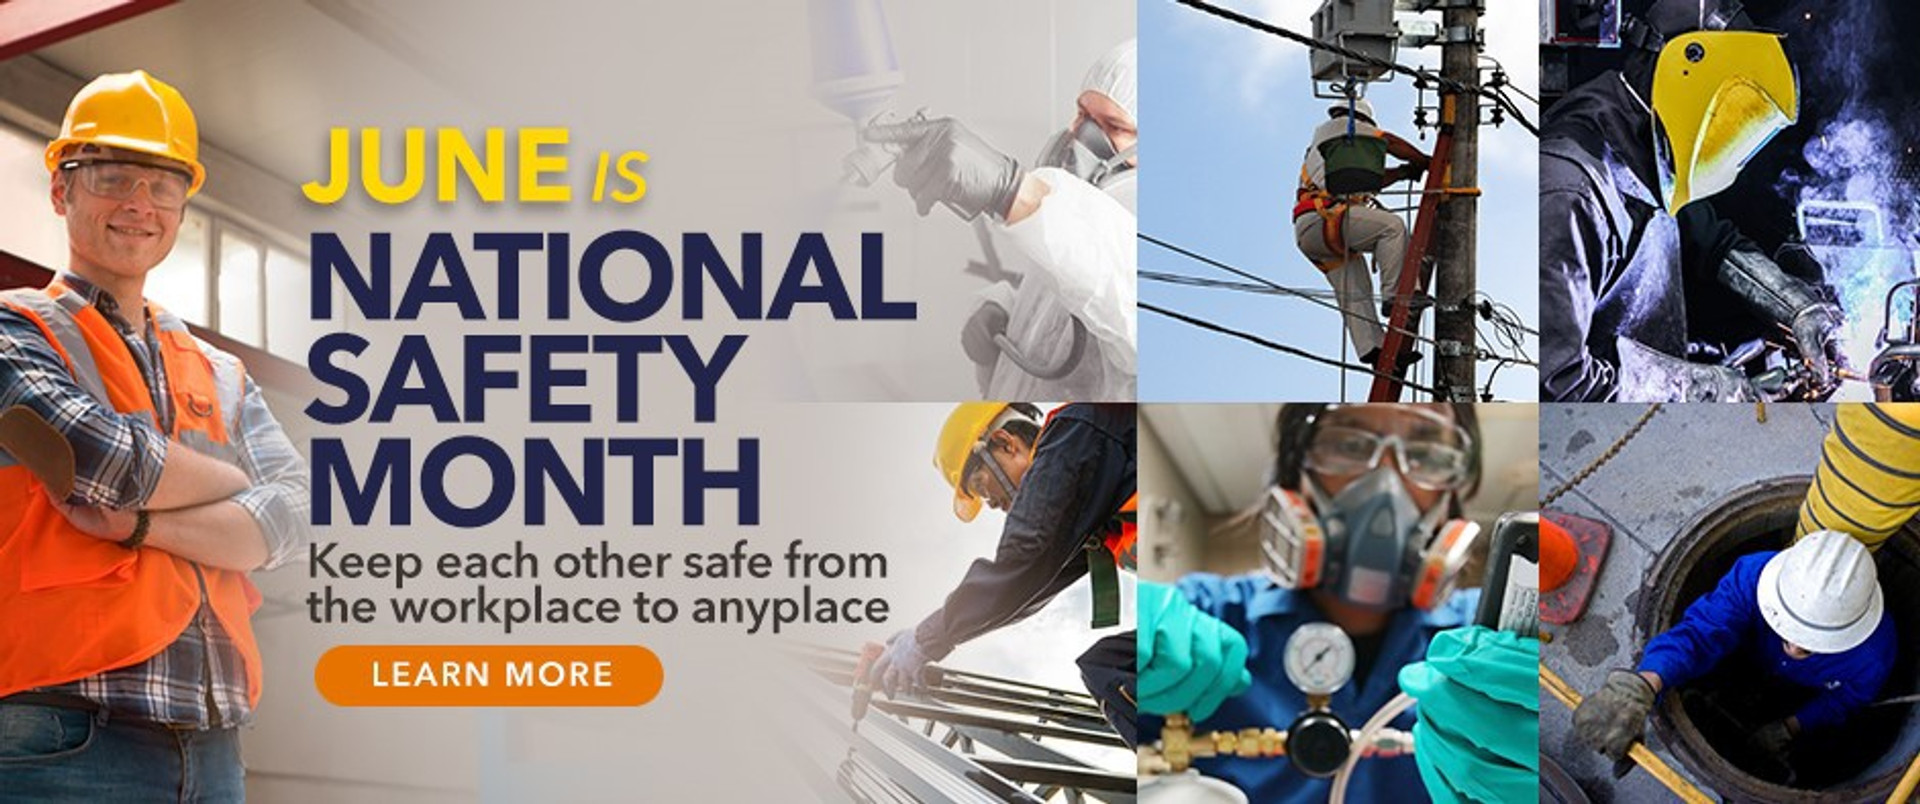 June is National Safety Month. Learn more in this blog article.